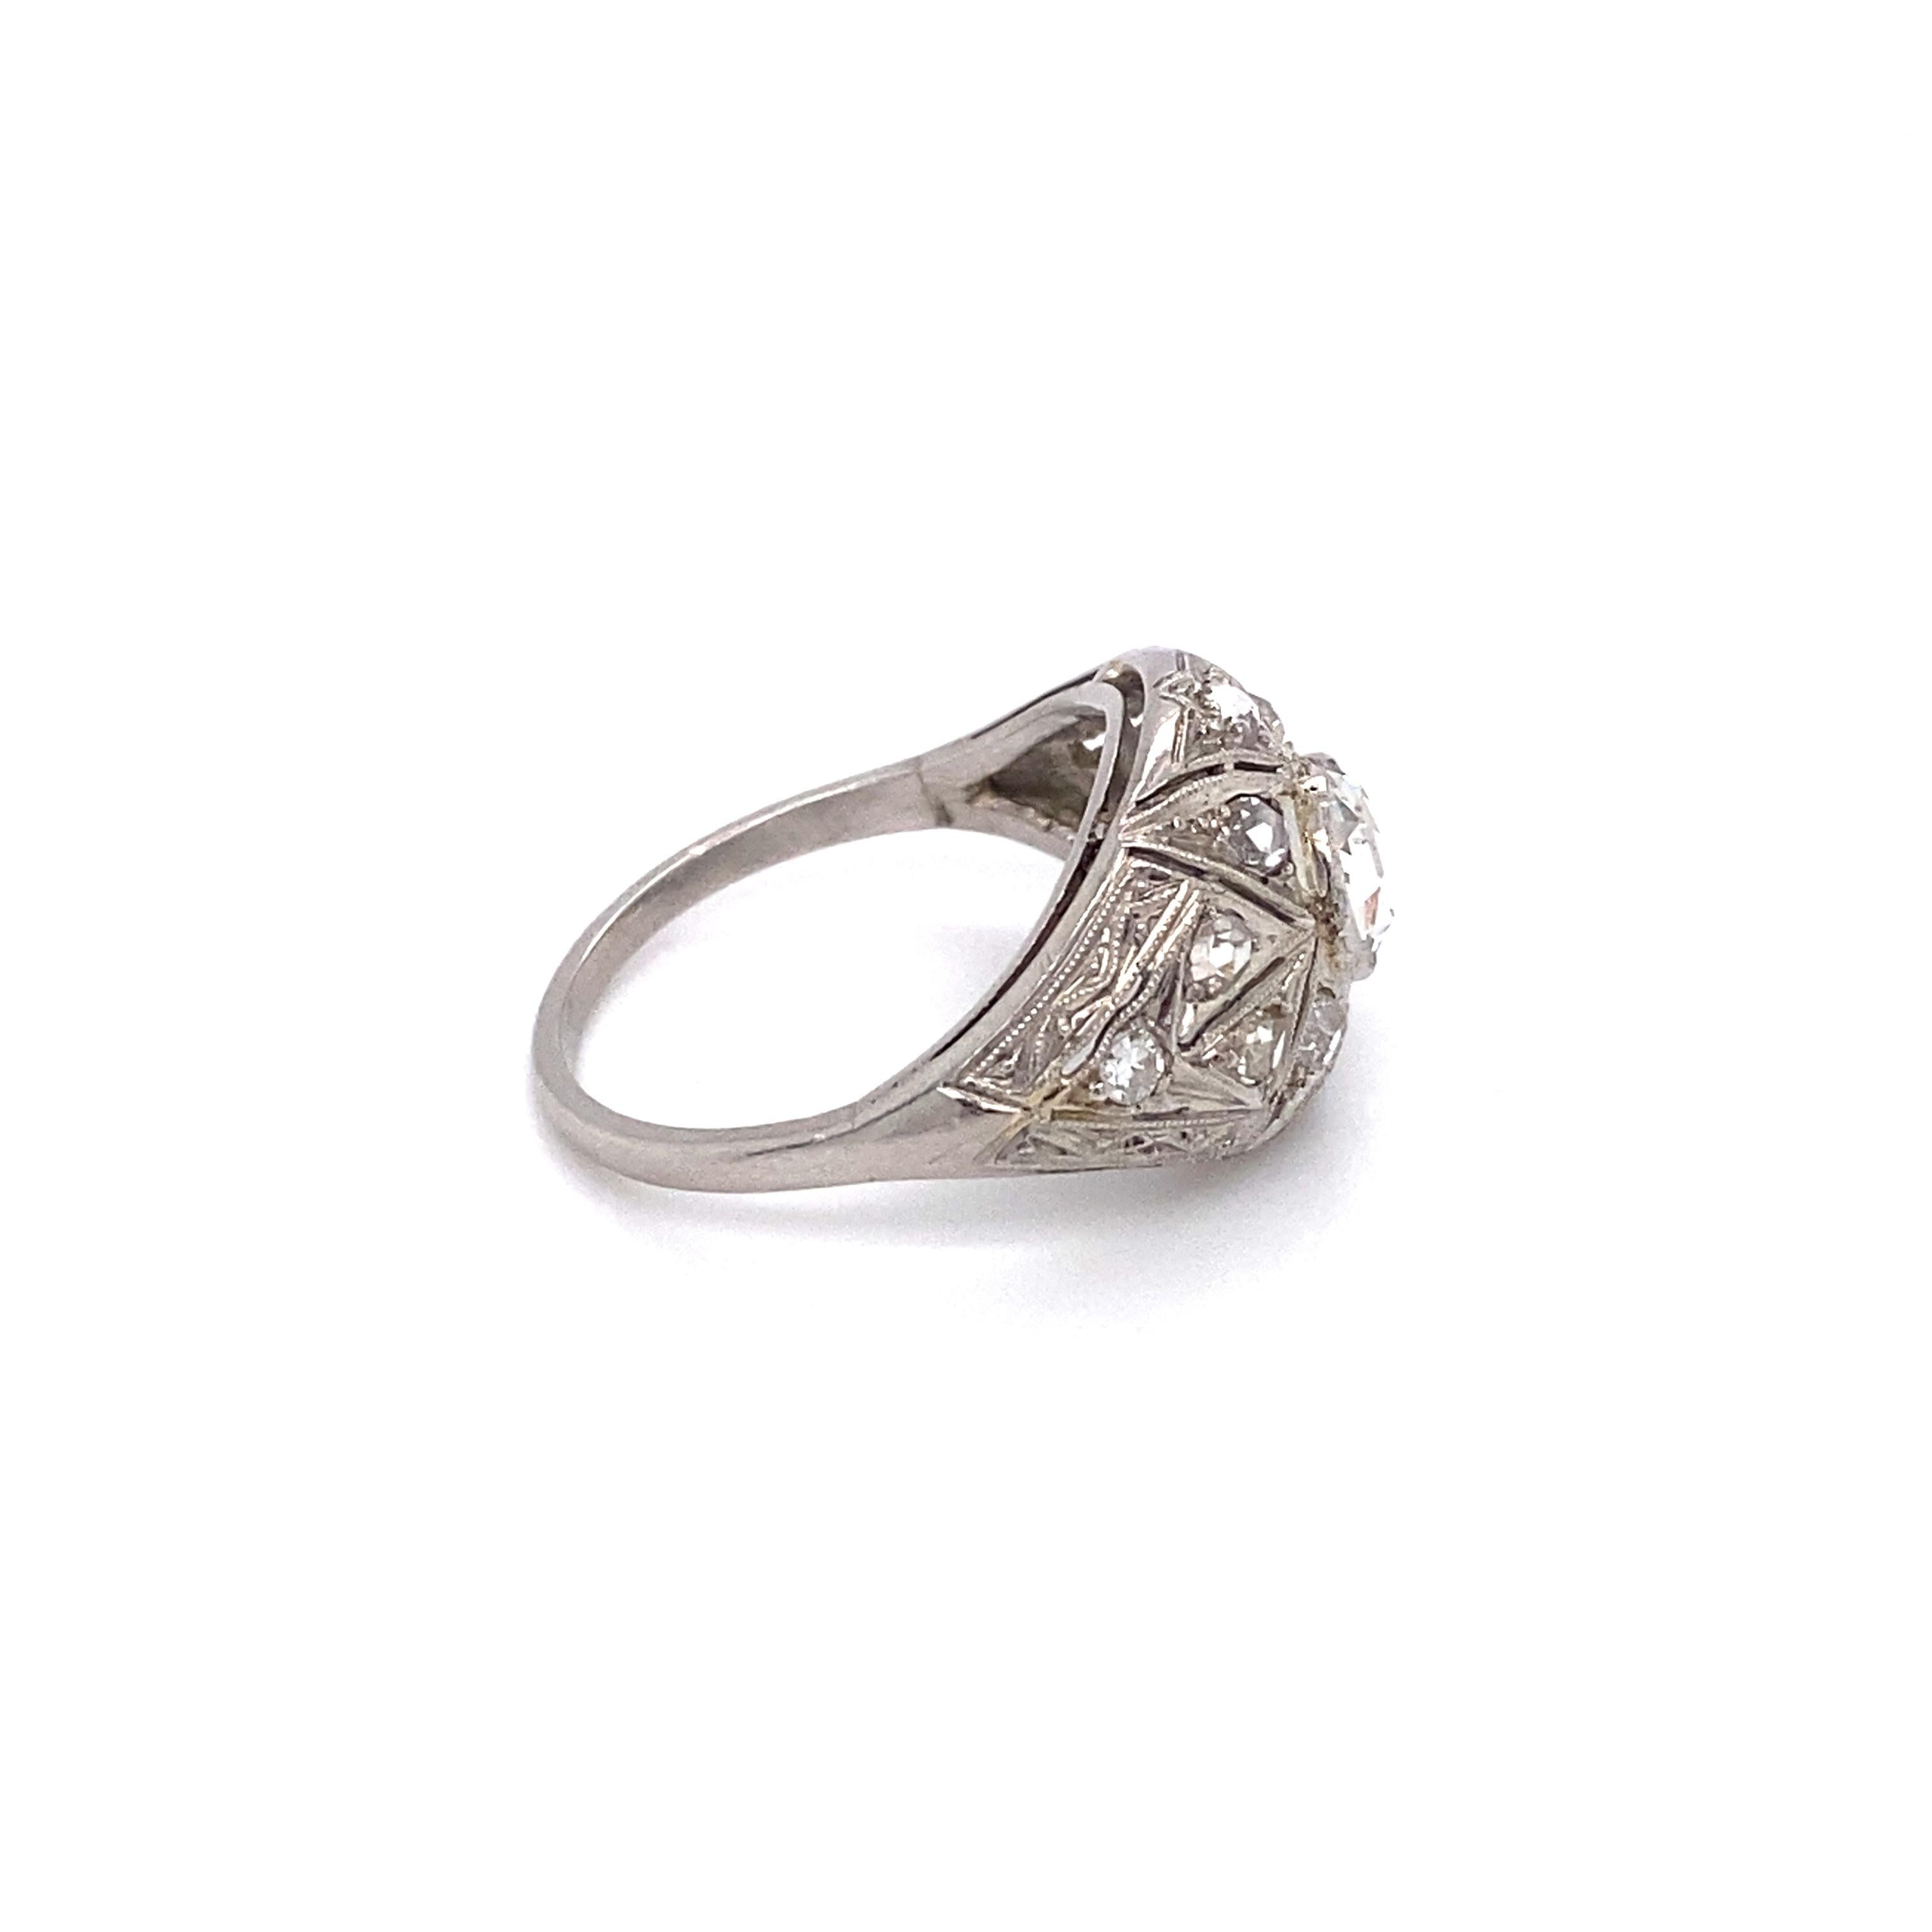 Circa: 1890s
Metal Type: Platinum and 14K White Gold
Size: US 6.75
Weight: 4.2g

Diamond Details:

Cut: Rose cut
Carat: Center is approximately 0.50 carats, total diamond weight 0.75 carat total weight
Color: K-L
Clarity: VS-I1